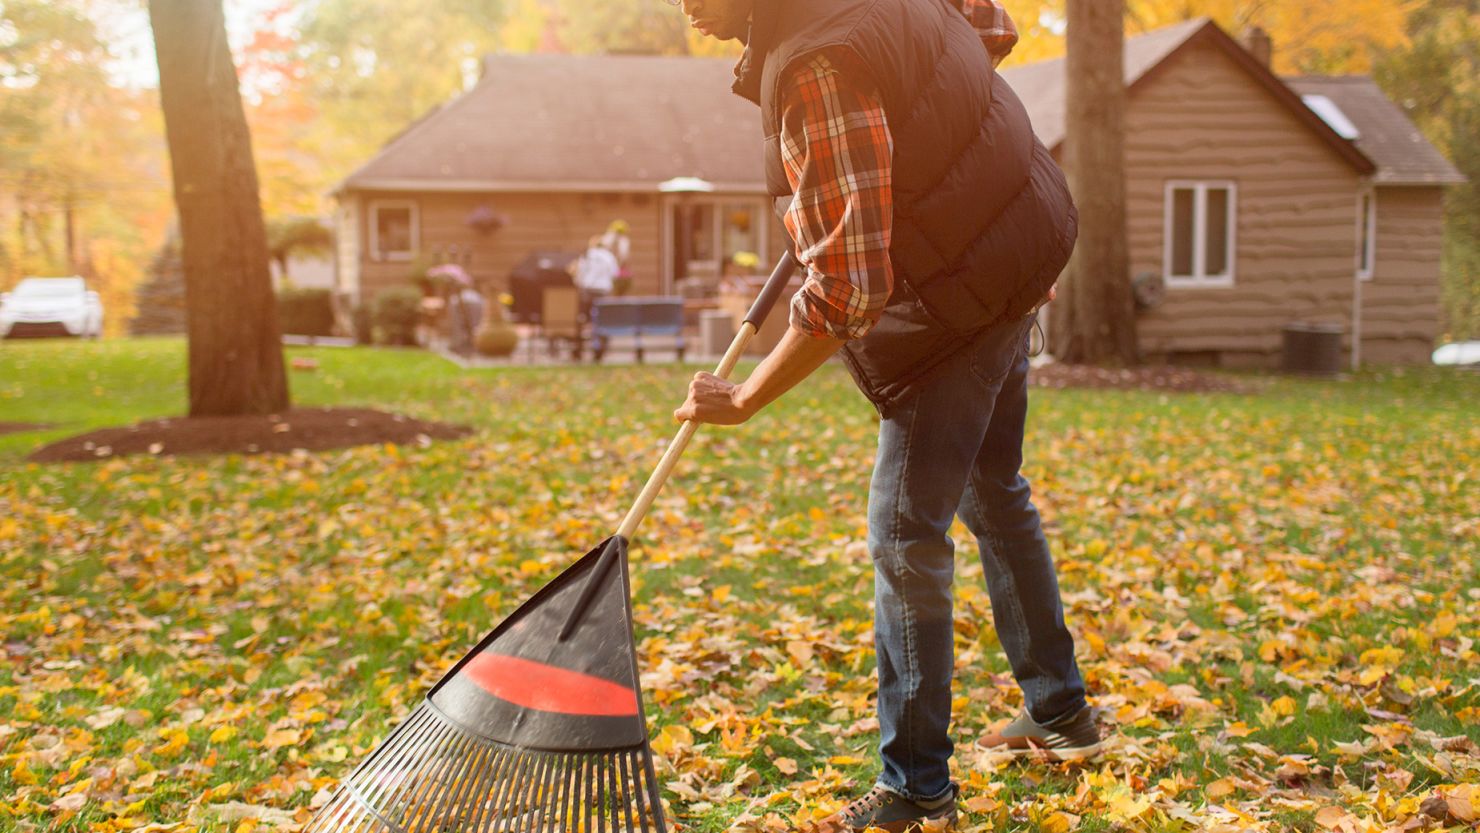 Raking leaves can burn more calories in an hour than a brisk walk or weight training session.